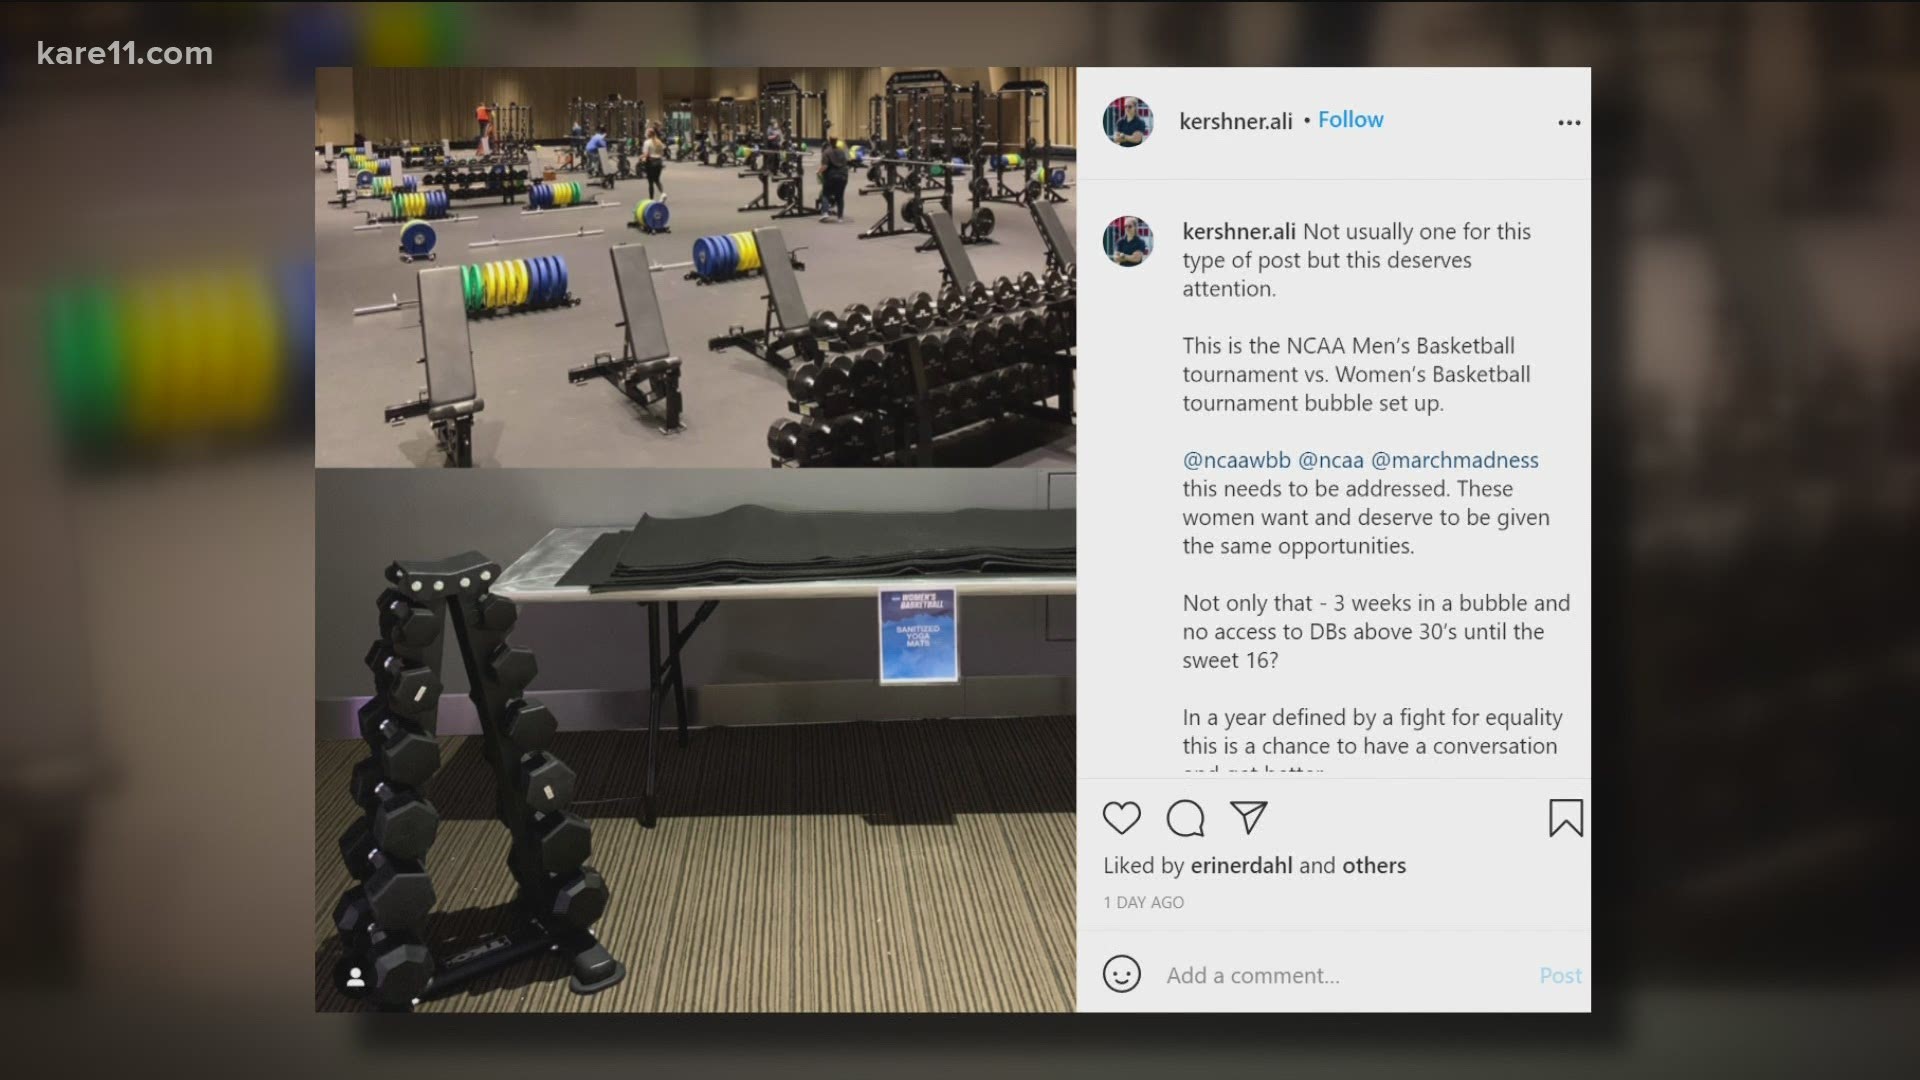 A viral post pointing out differences between the men's and women's weight rooms at the NCAA basketball bubbles has reignited discussion of inequity in sports.